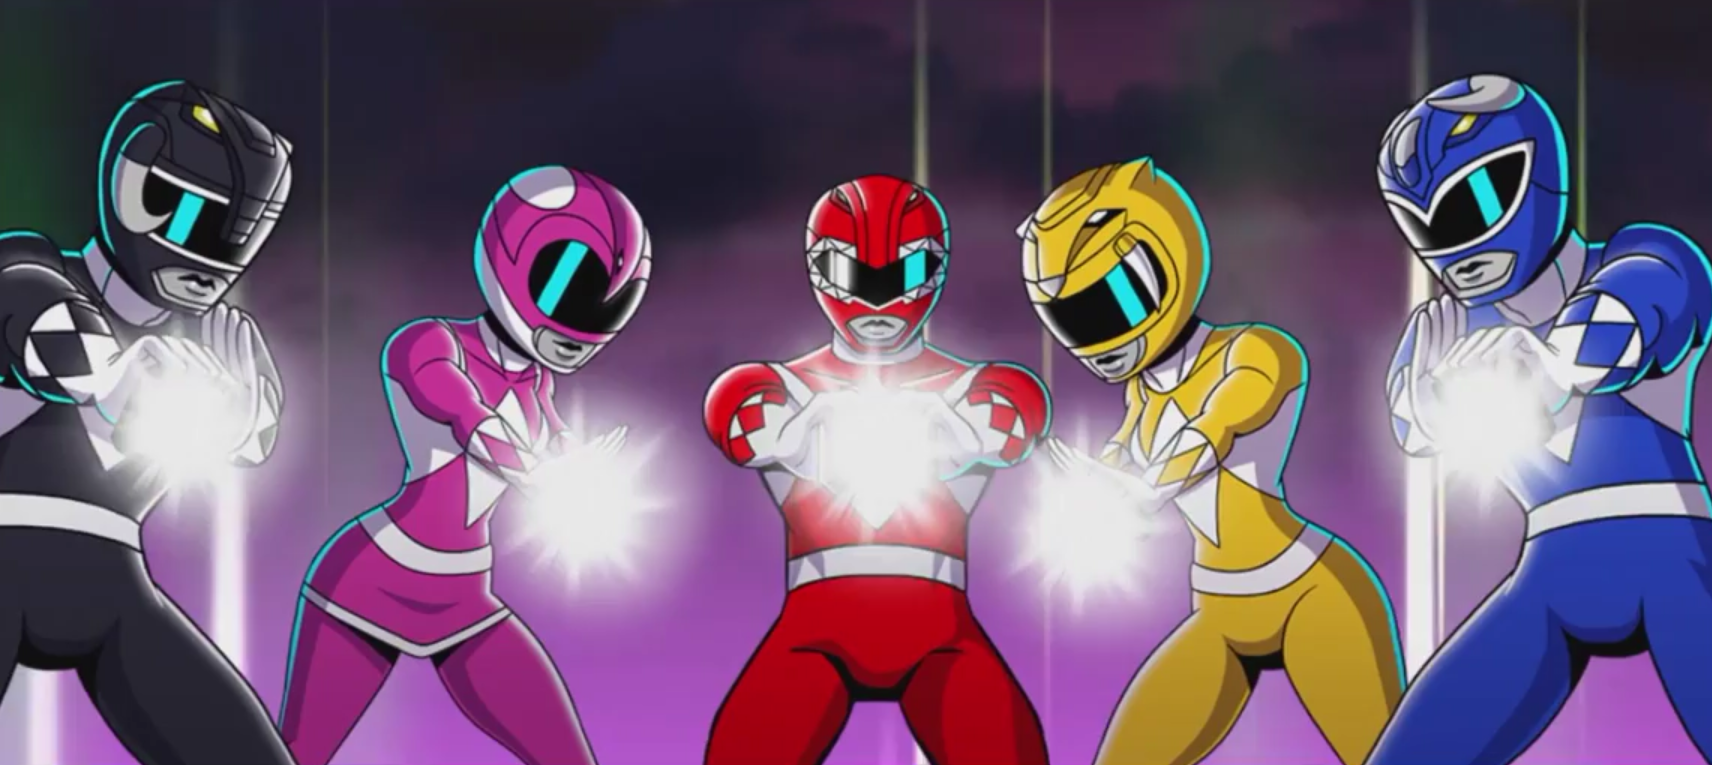 There's a Power Rangers animated reboot in the works - and it's 